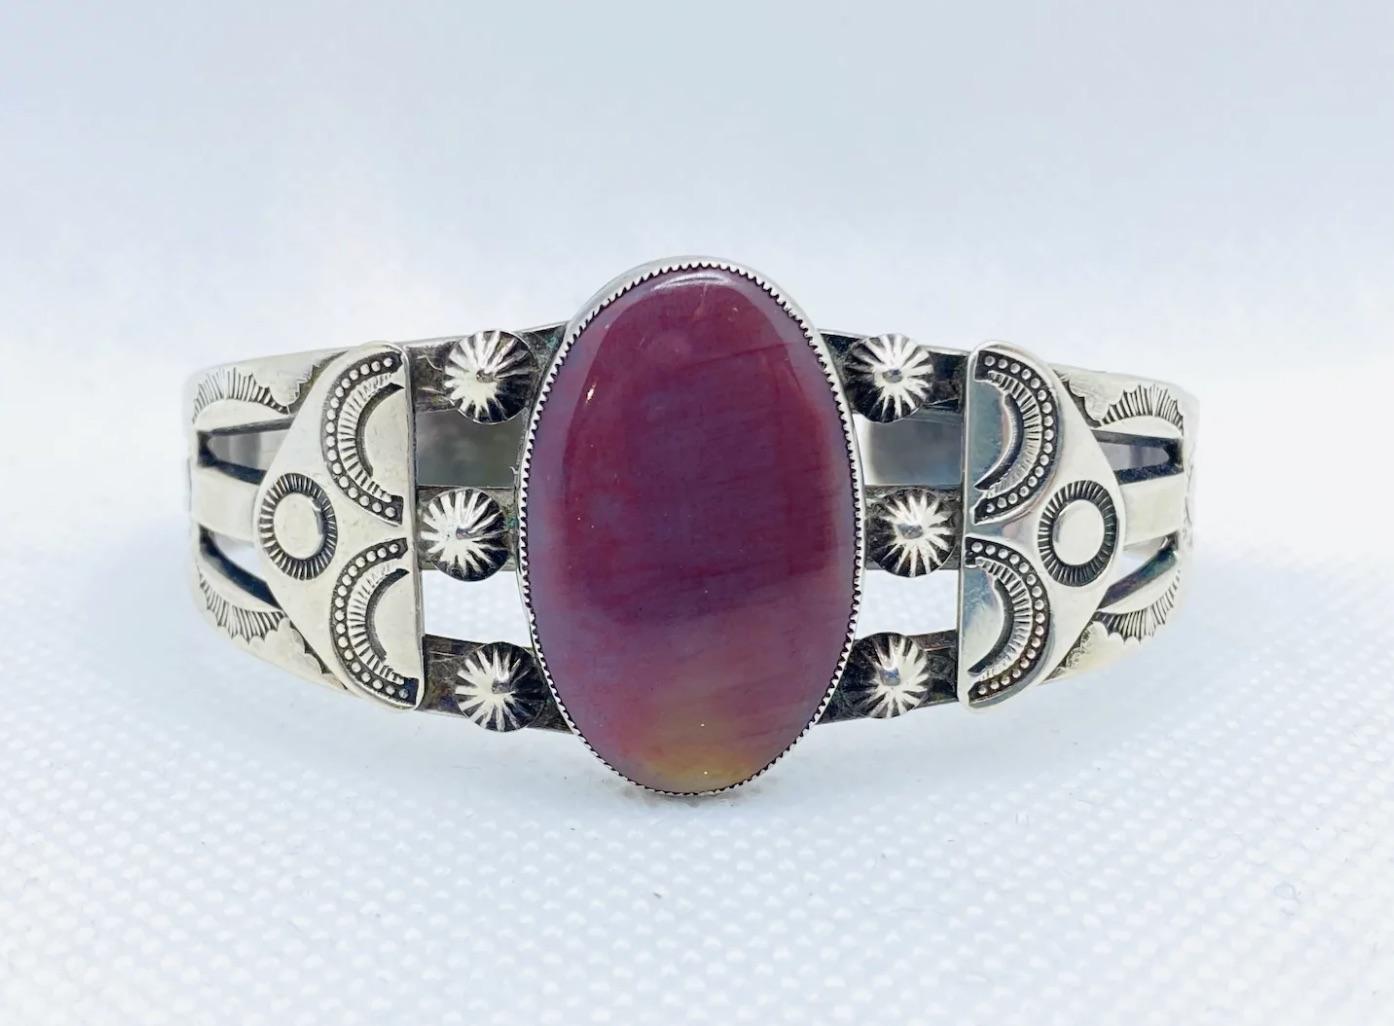 Vintage Native American Bangle Cuff Silver Purple Stone

Consistent with age and use please see the photos for condition
Please ask for more photos if you need we will send them with in 24-48 hours

Due to the item's age do not expect items to be in